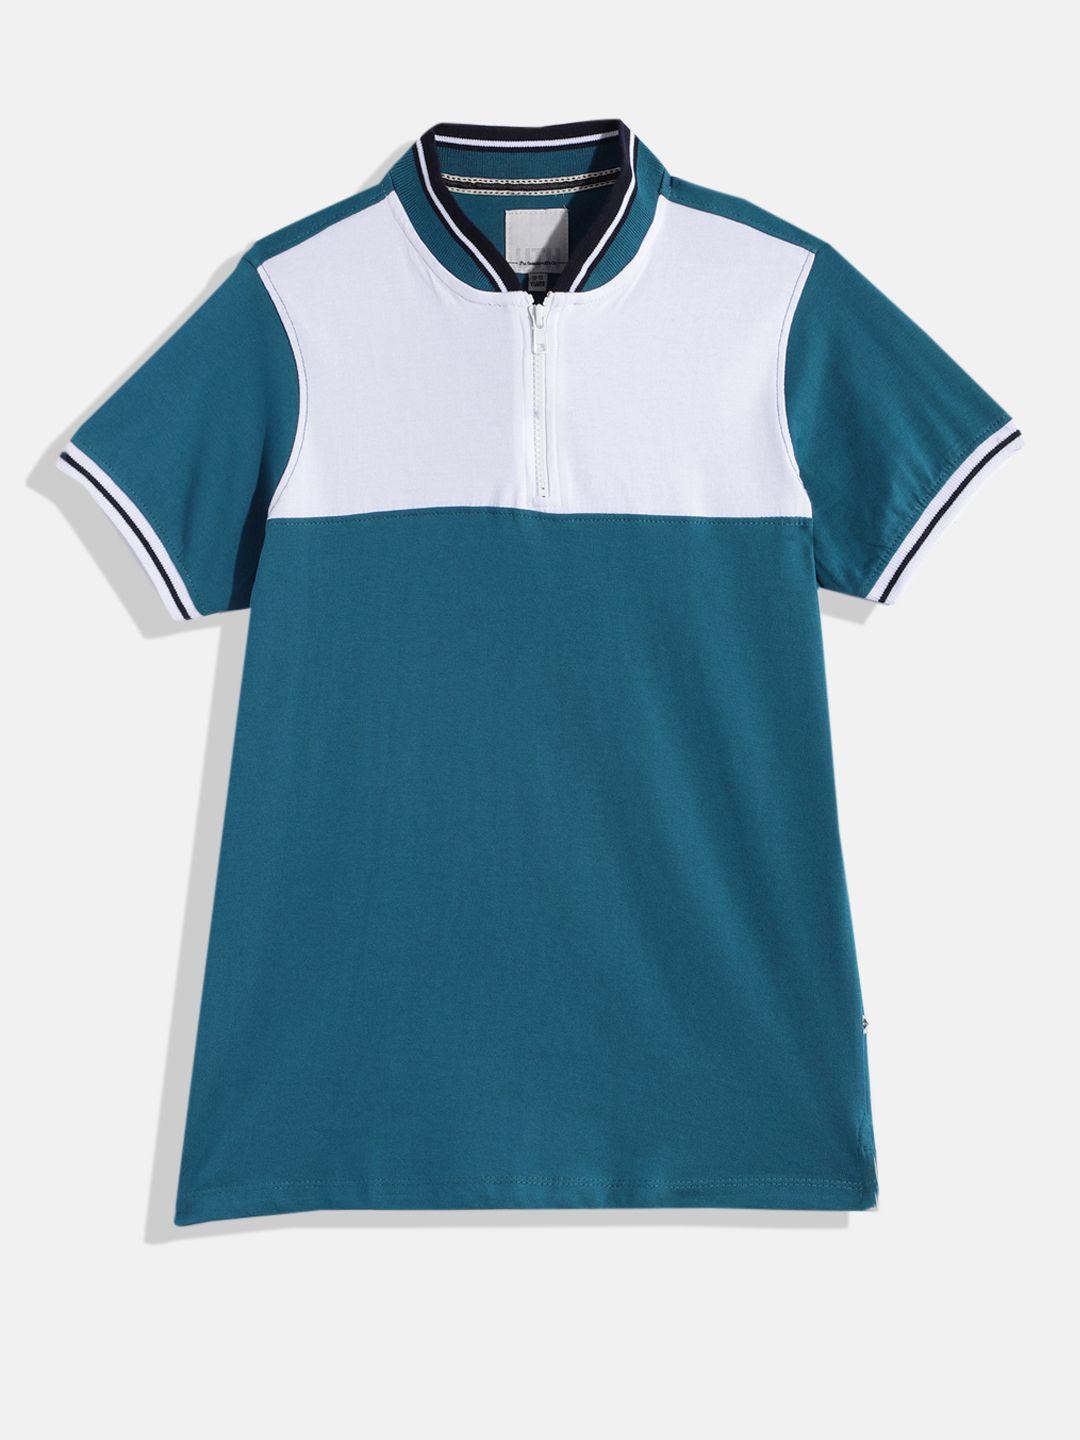 uth by roadster boys teal blue & white colourblocked pure cotton t-shirt